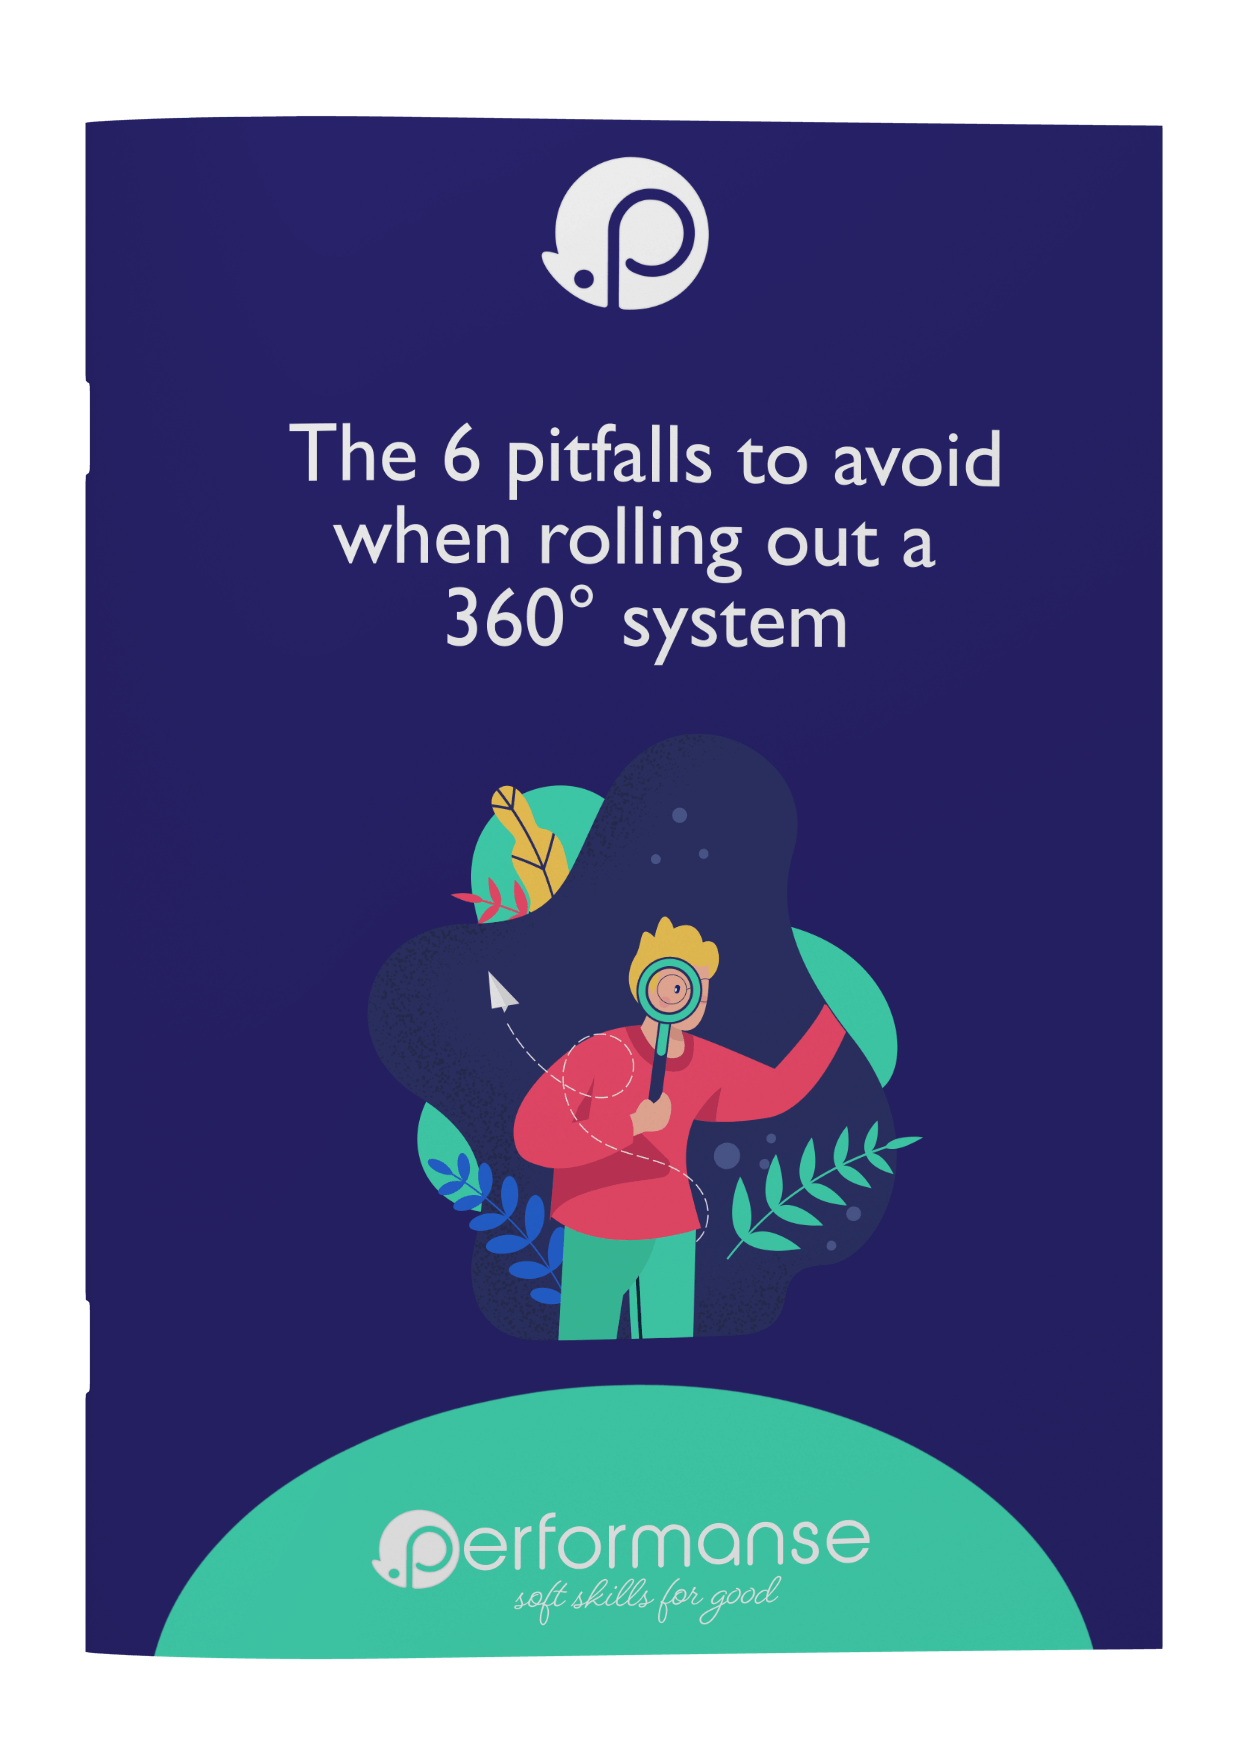 The 6 pitfalls to avoid when rolling out a 360° system